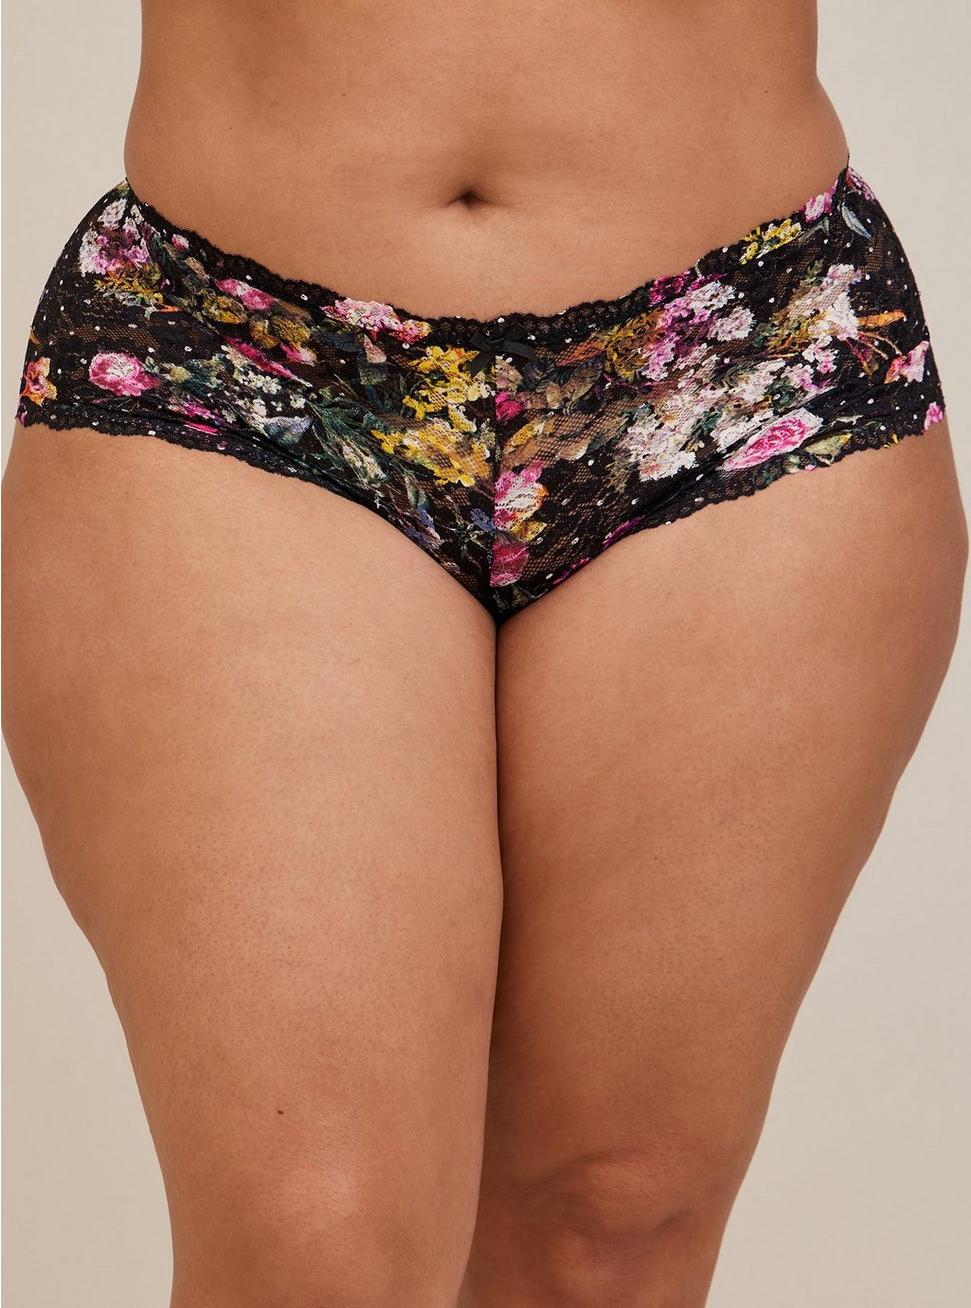 Simply Lace Mid-Rise Cheeky Panty, TRANCE FLORAL BLACK, alternate